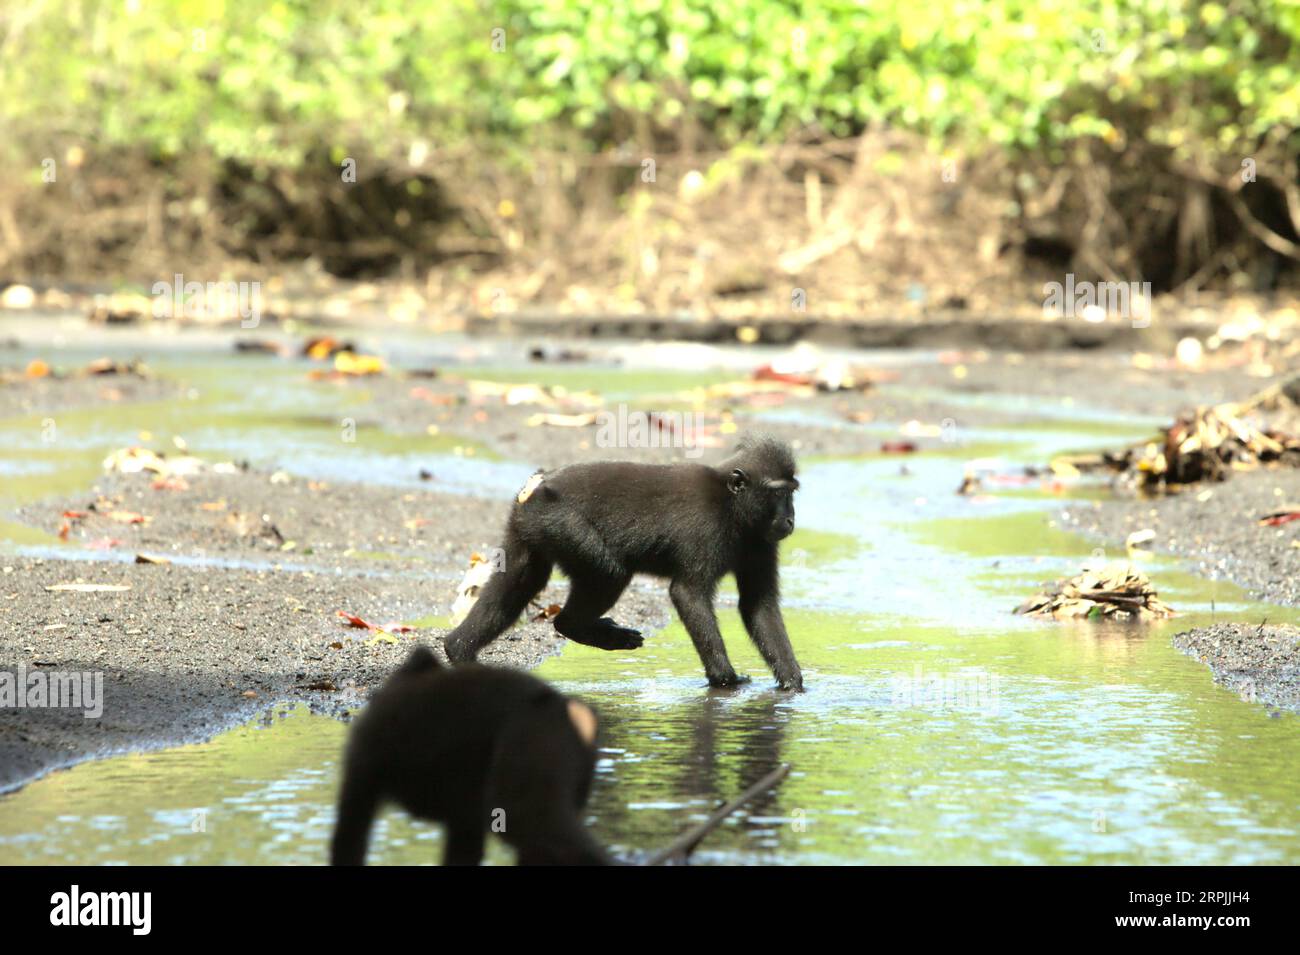 Crested macaques (Macaca nigra) are foraging on a stream close to a beach in Tangkoko forest, North Sulawesi, Indonesia. Climate change may reduce the habitat suitability of primate species, that could force them to move out of safe habitats and face more potential conflicts with human, scientists say. A recent report revealed that the temperature is increasing in Tangkoko forest, and the overall fruit abundance decreased, while at the same time crested macaque belongs to the 10% of primate species that are highly vulnerable to droughts. Stock Photo